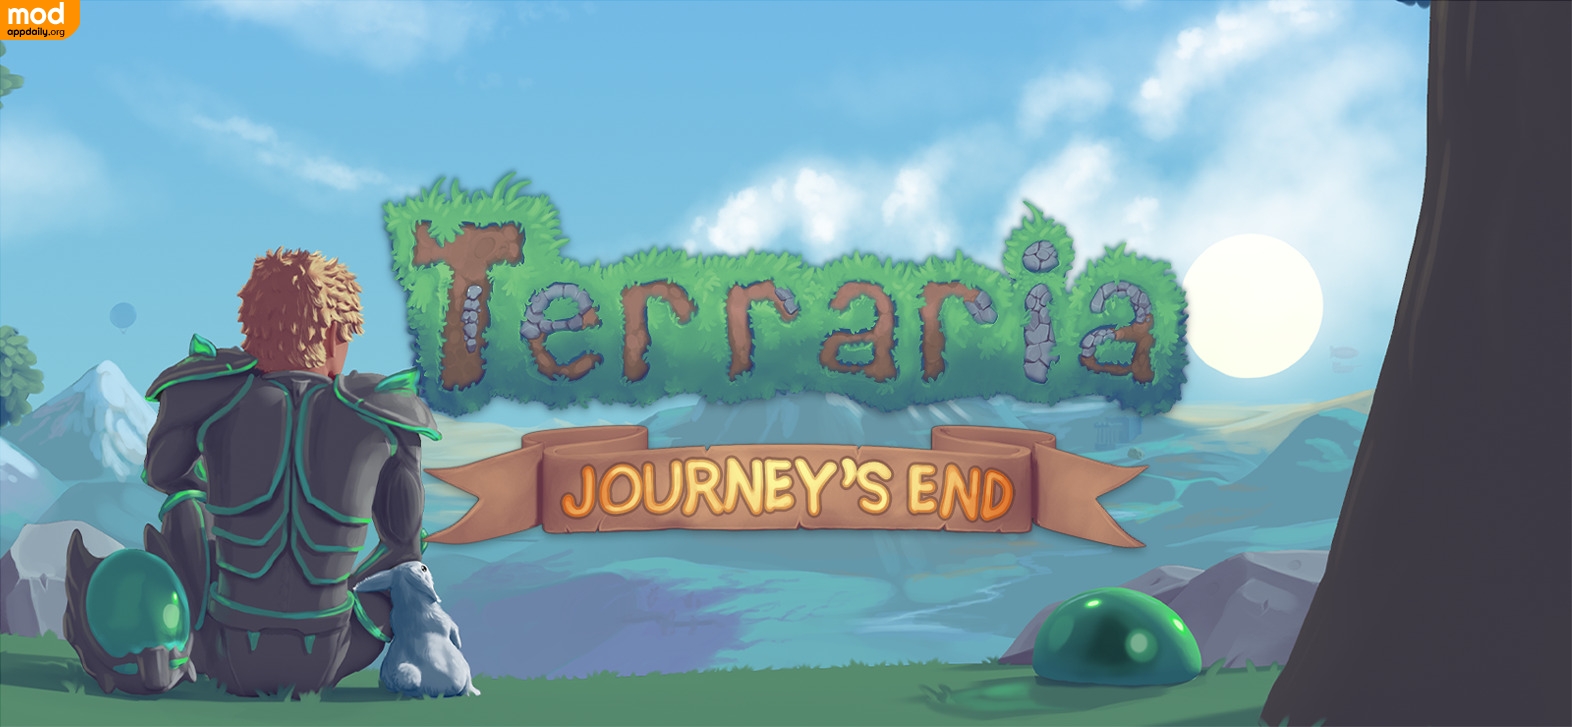 Teraria MODs are modified APK programs and games, as we mentioned previously